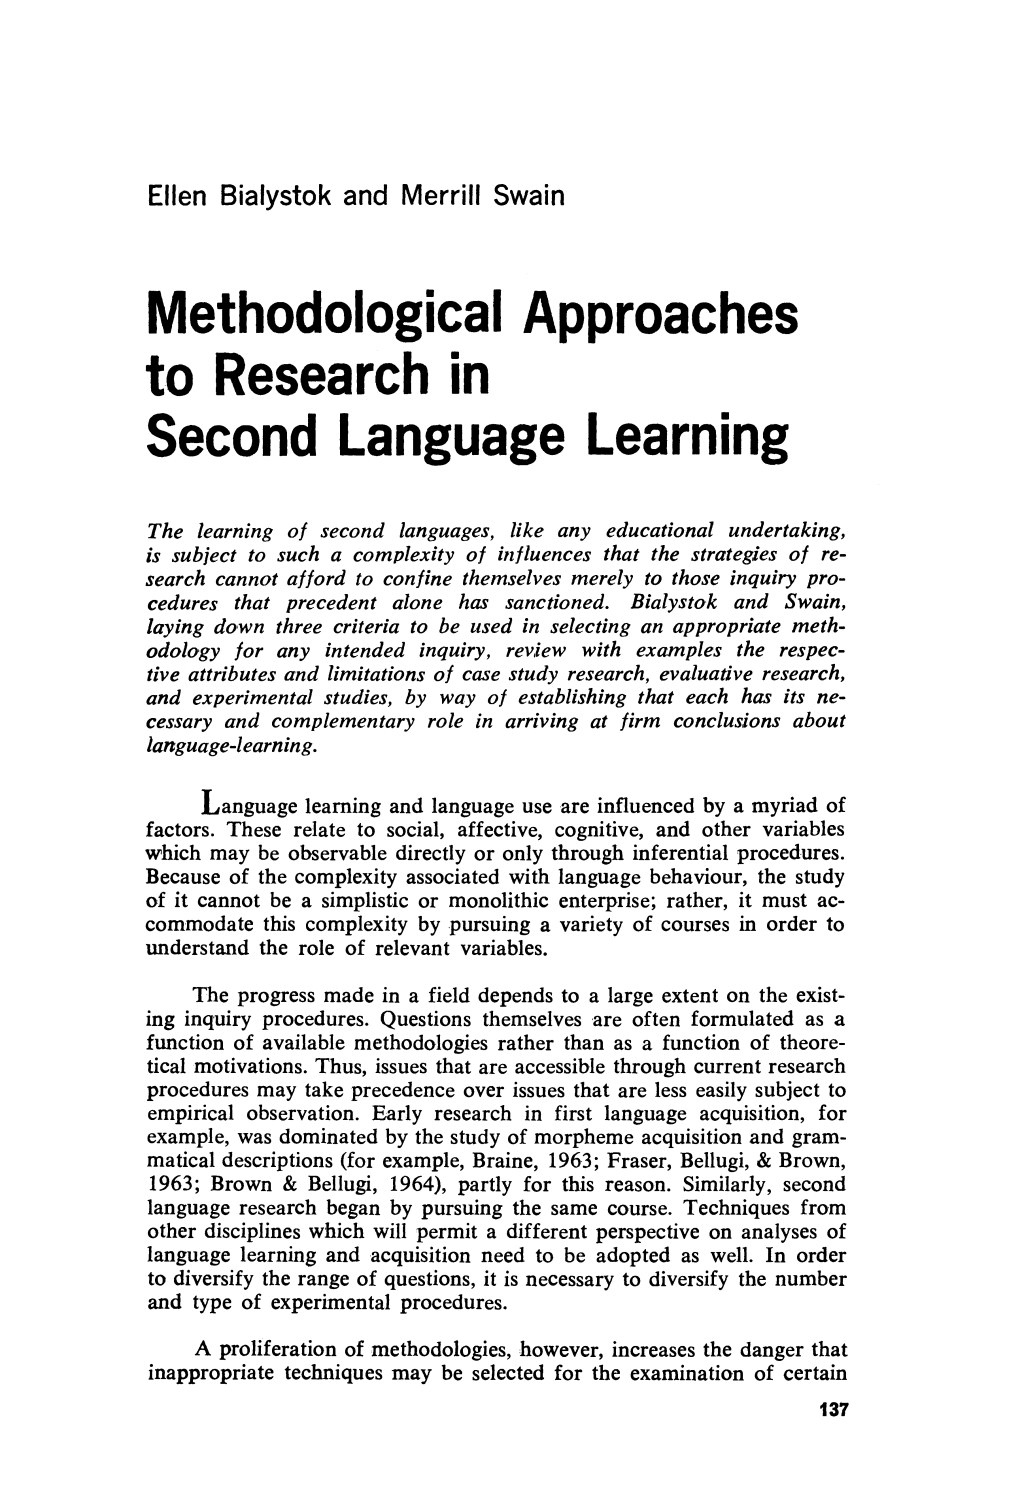 Methodological Approaches to Research in Second Language Learning